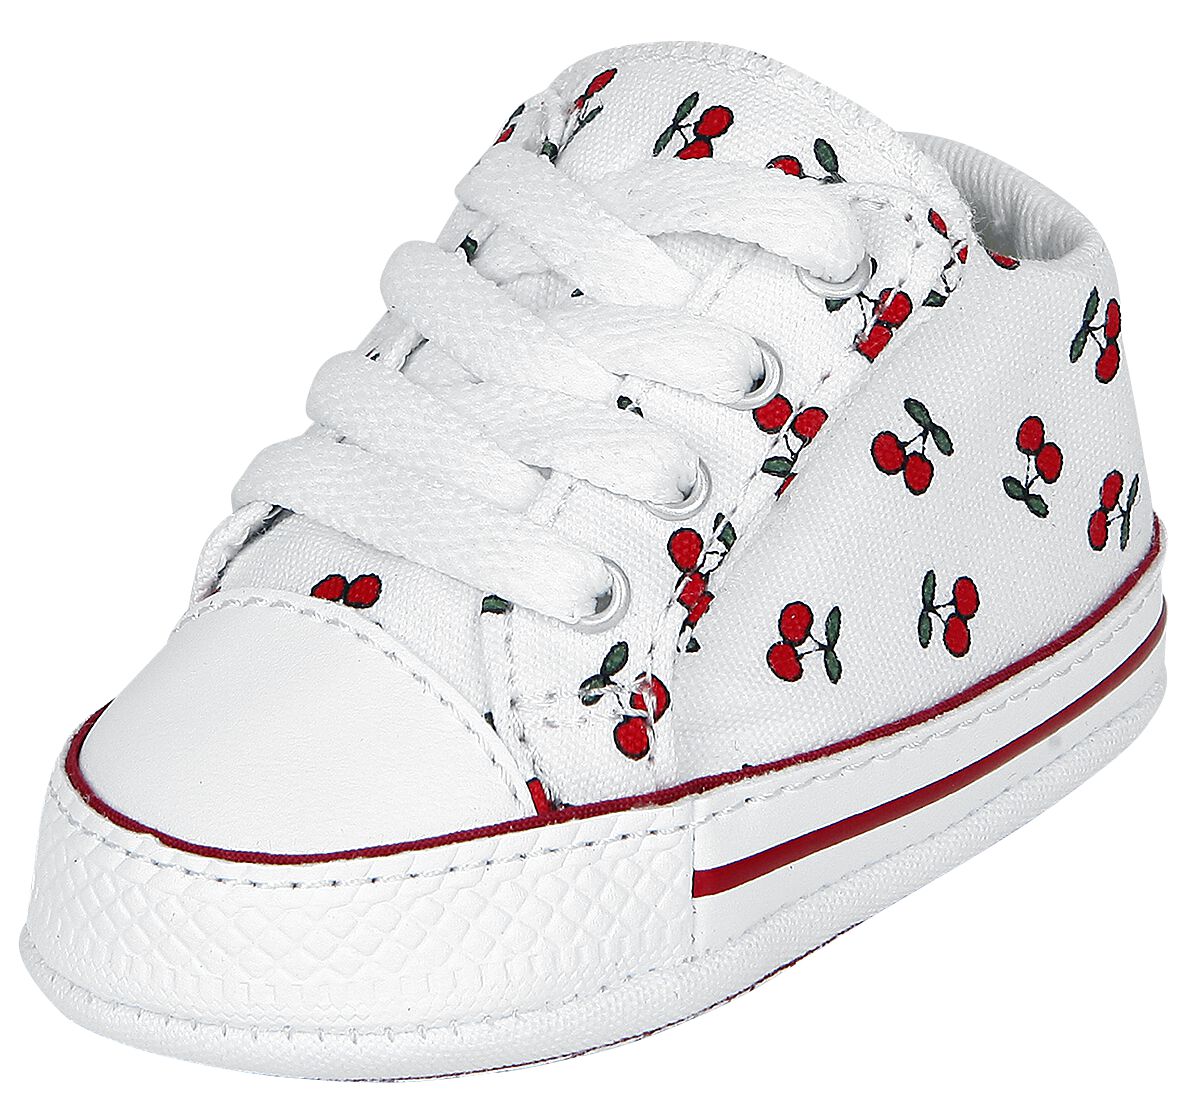 Converse Chuck Taylor First Star Cherry Cribster Baby shoes white red